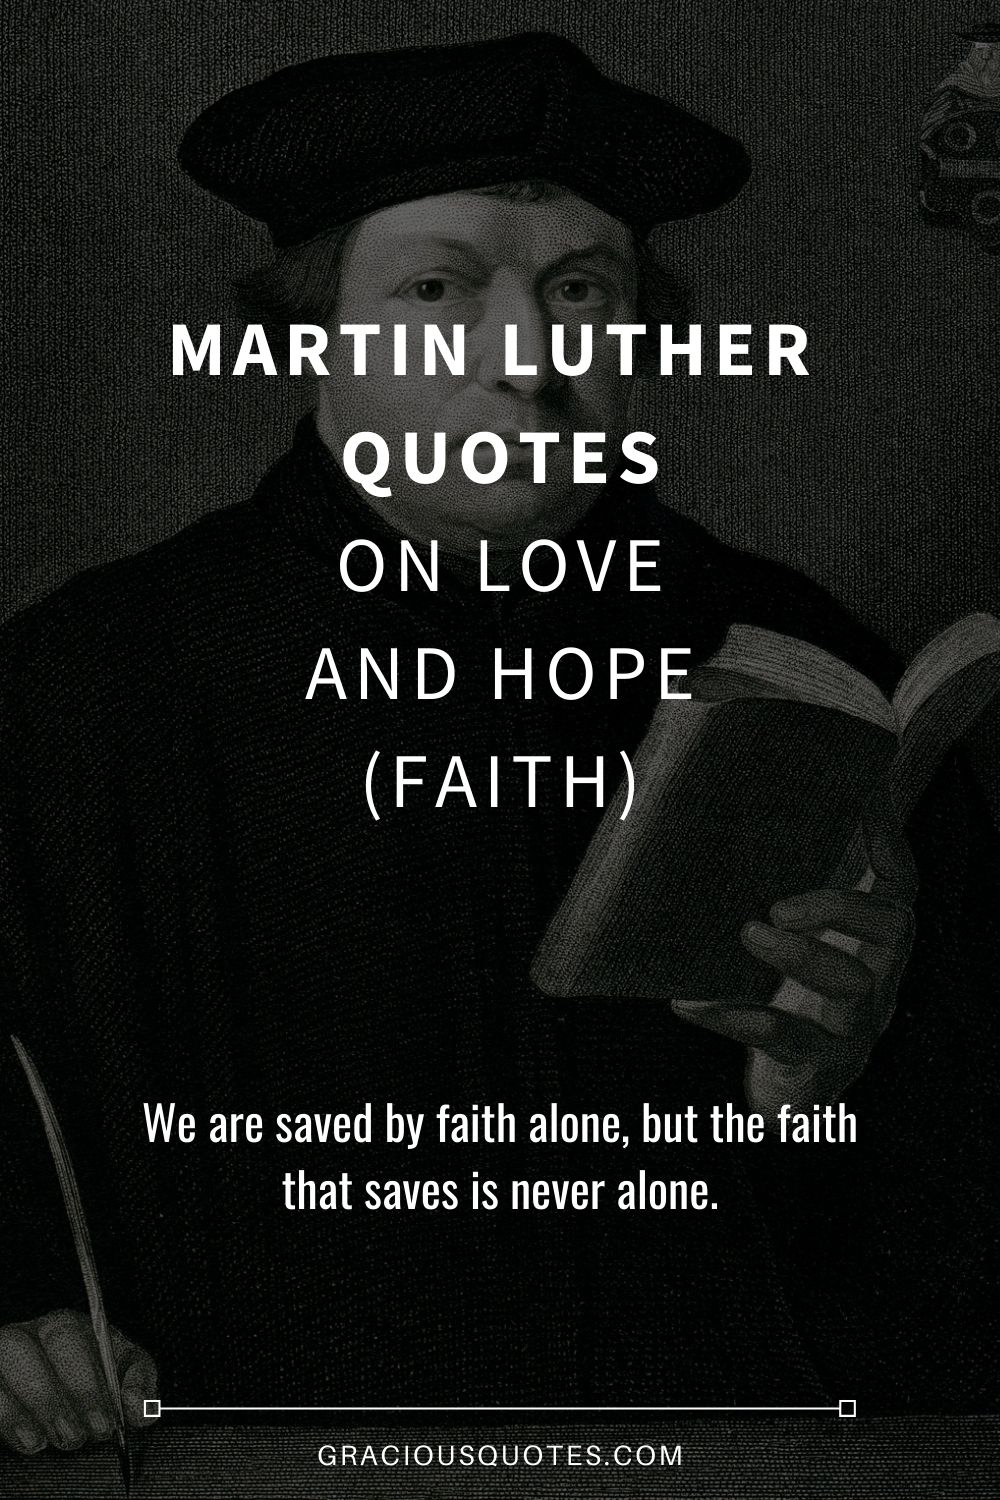 Martin Luther Quotes on Love and Hope (FAITH) - Gracious Quotes